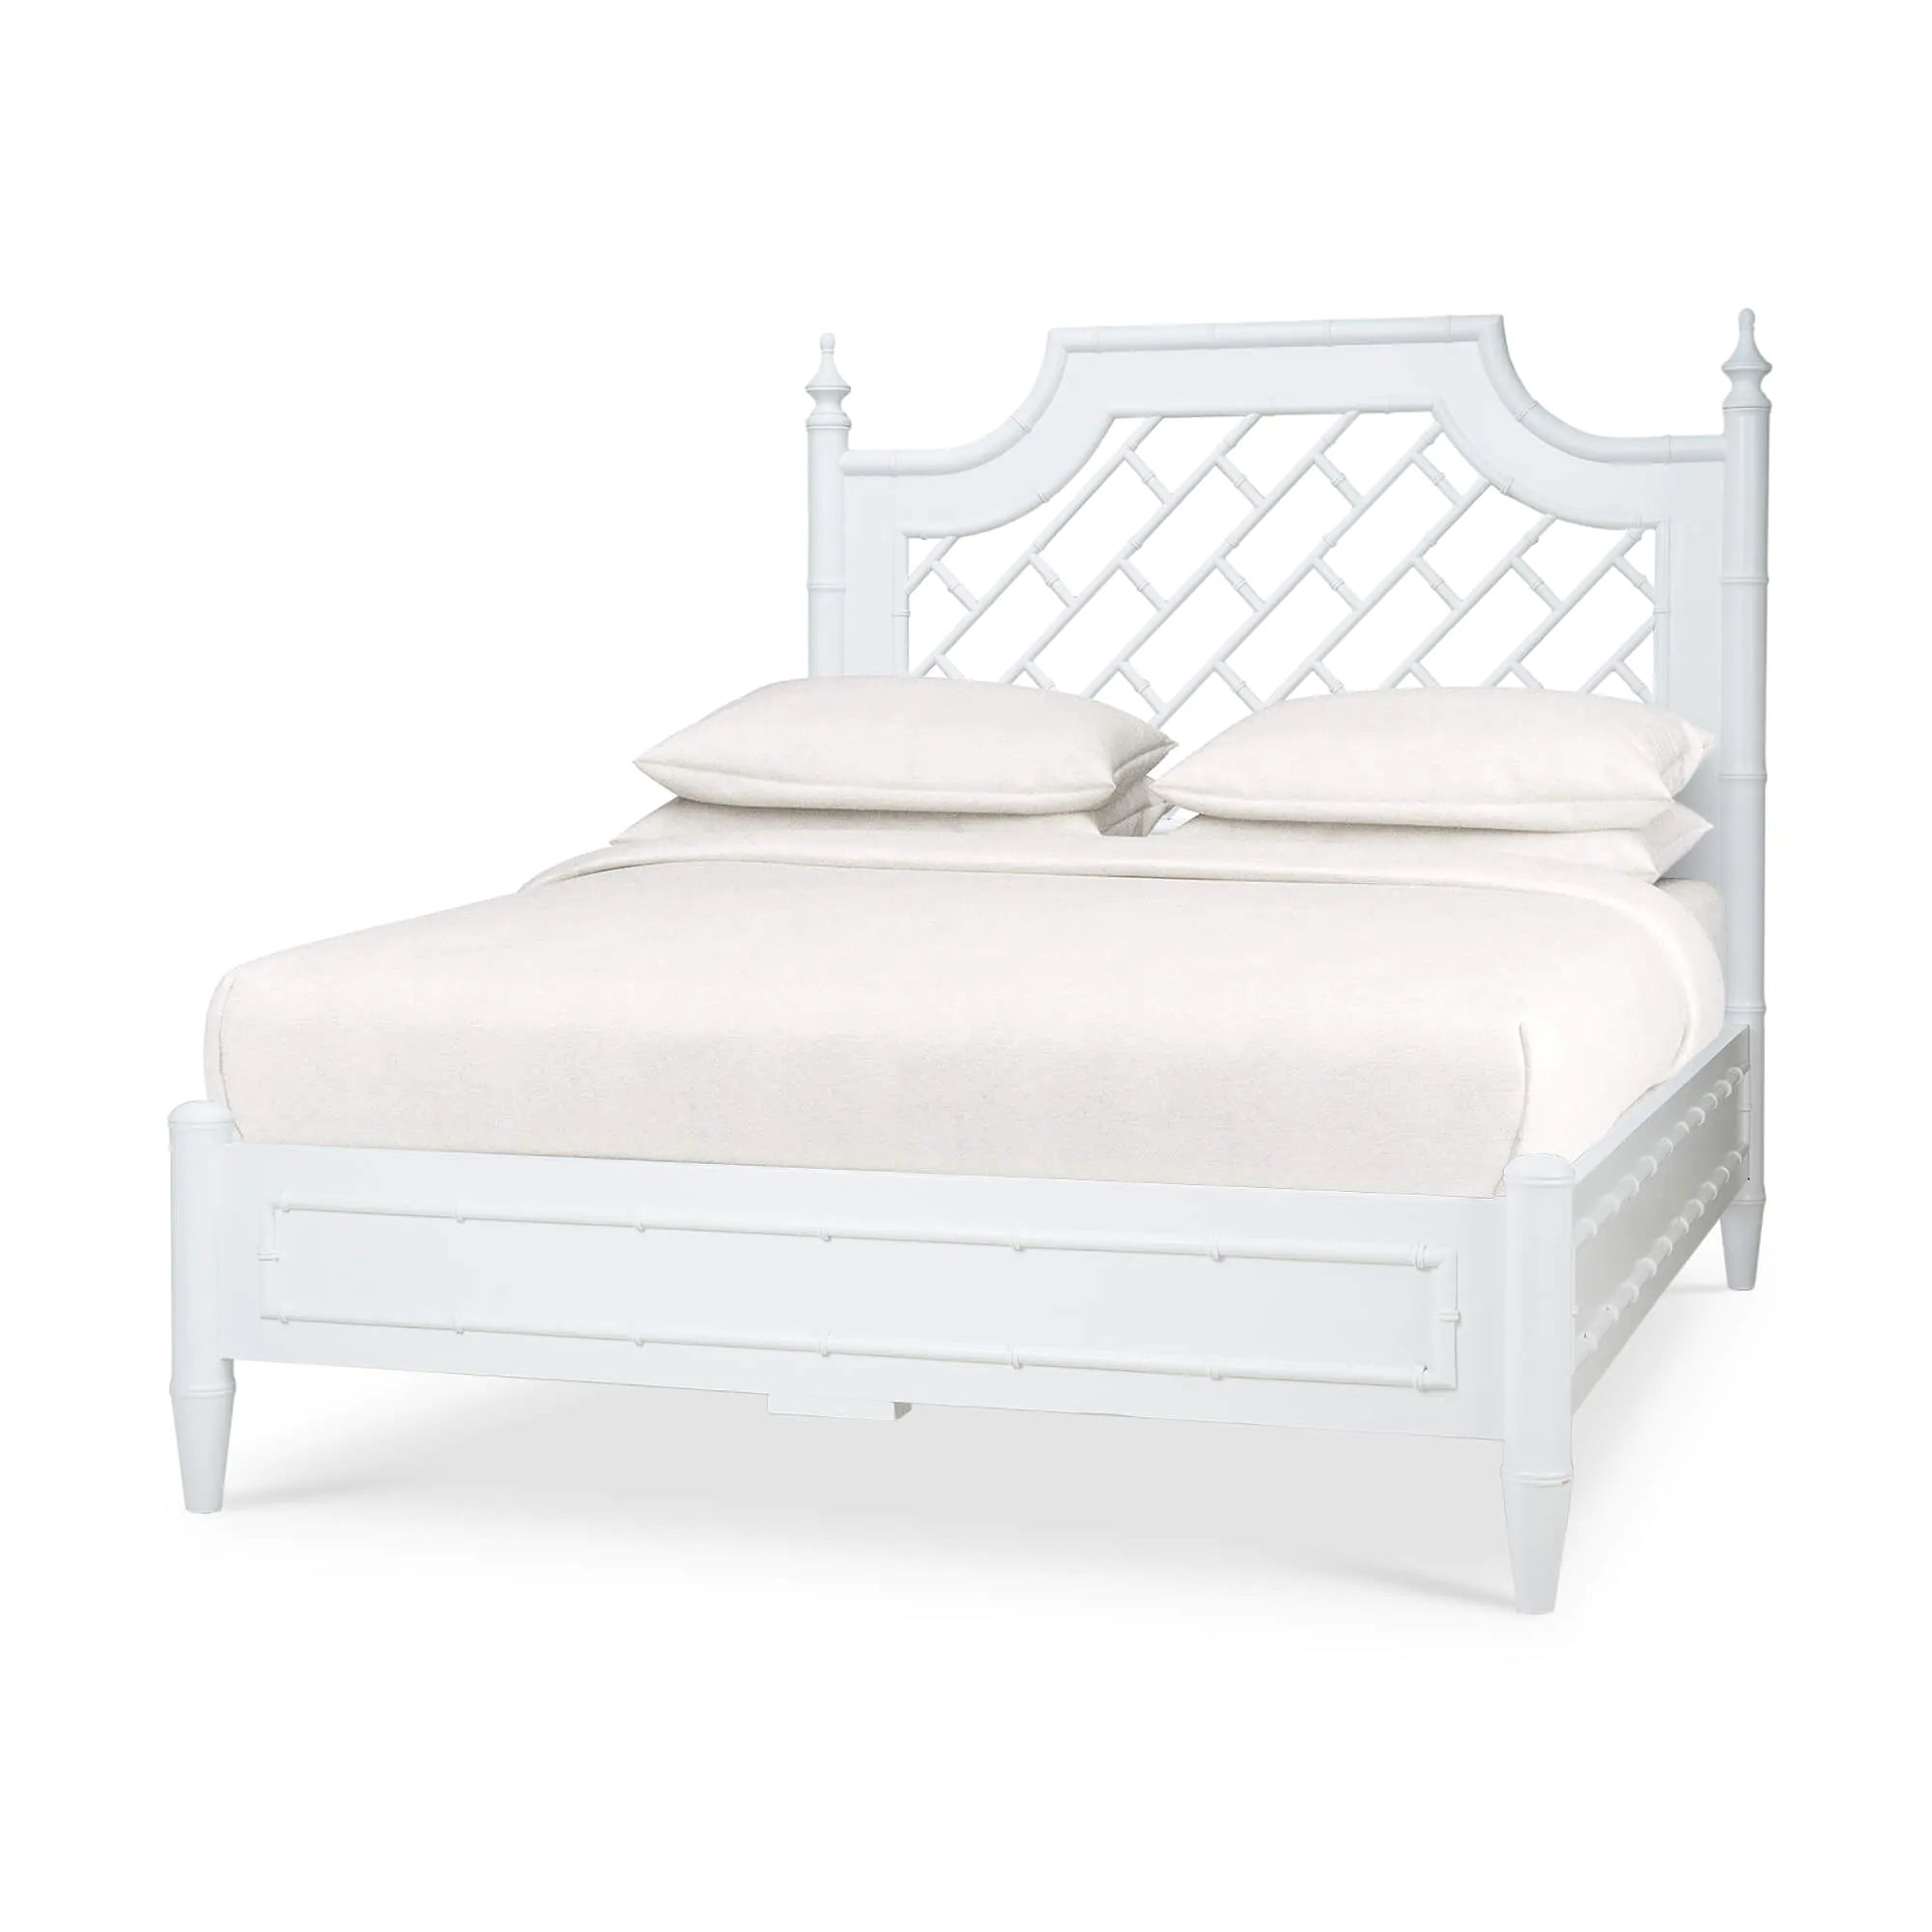 Chelsea Bed Queen Architectural White, Light Distressed